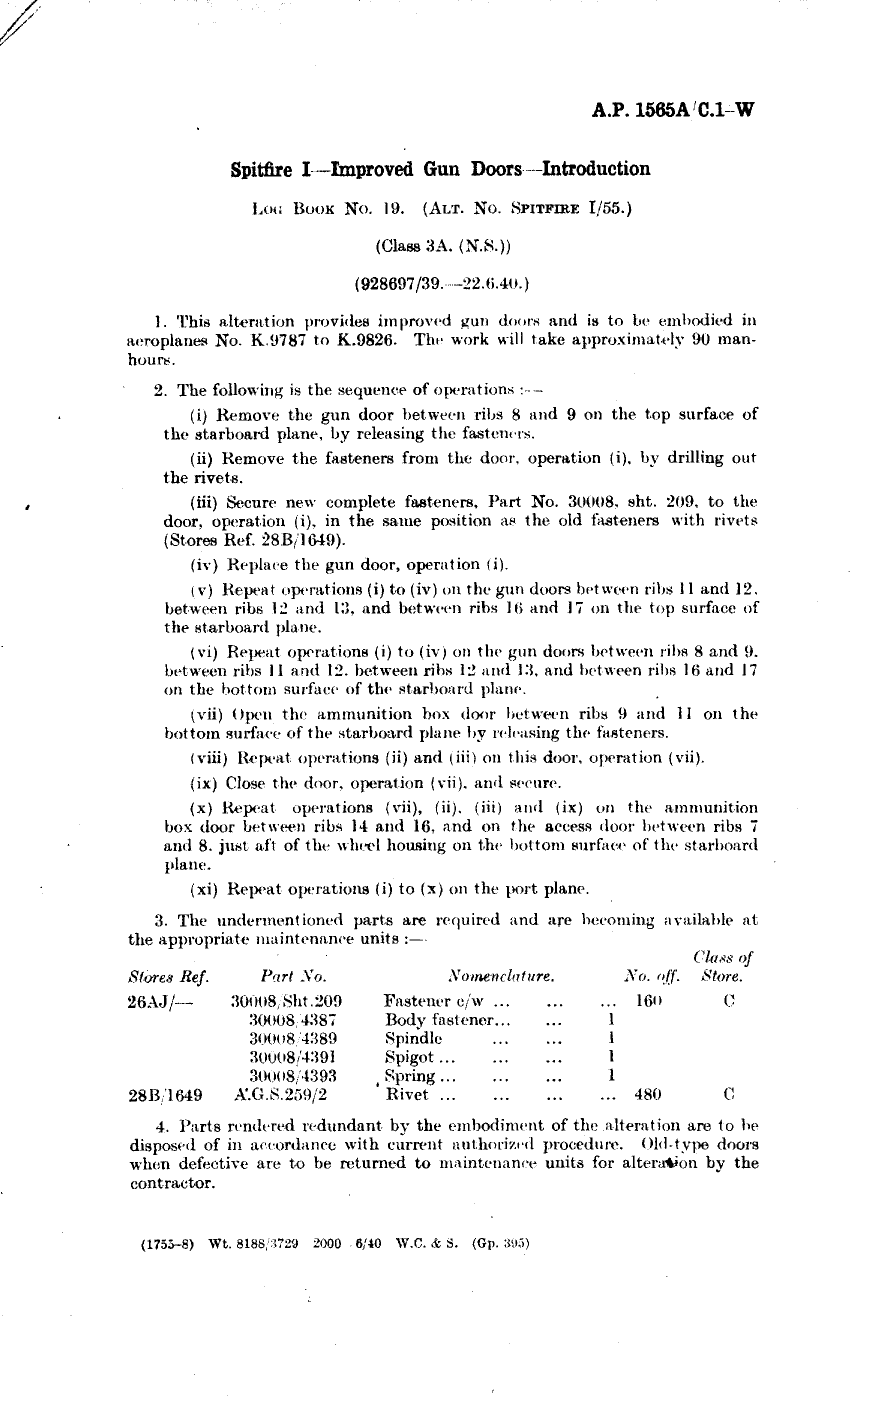 Sample page 1 from AirCorps Library document: Spitfire I Improved Gun Doors Introduction